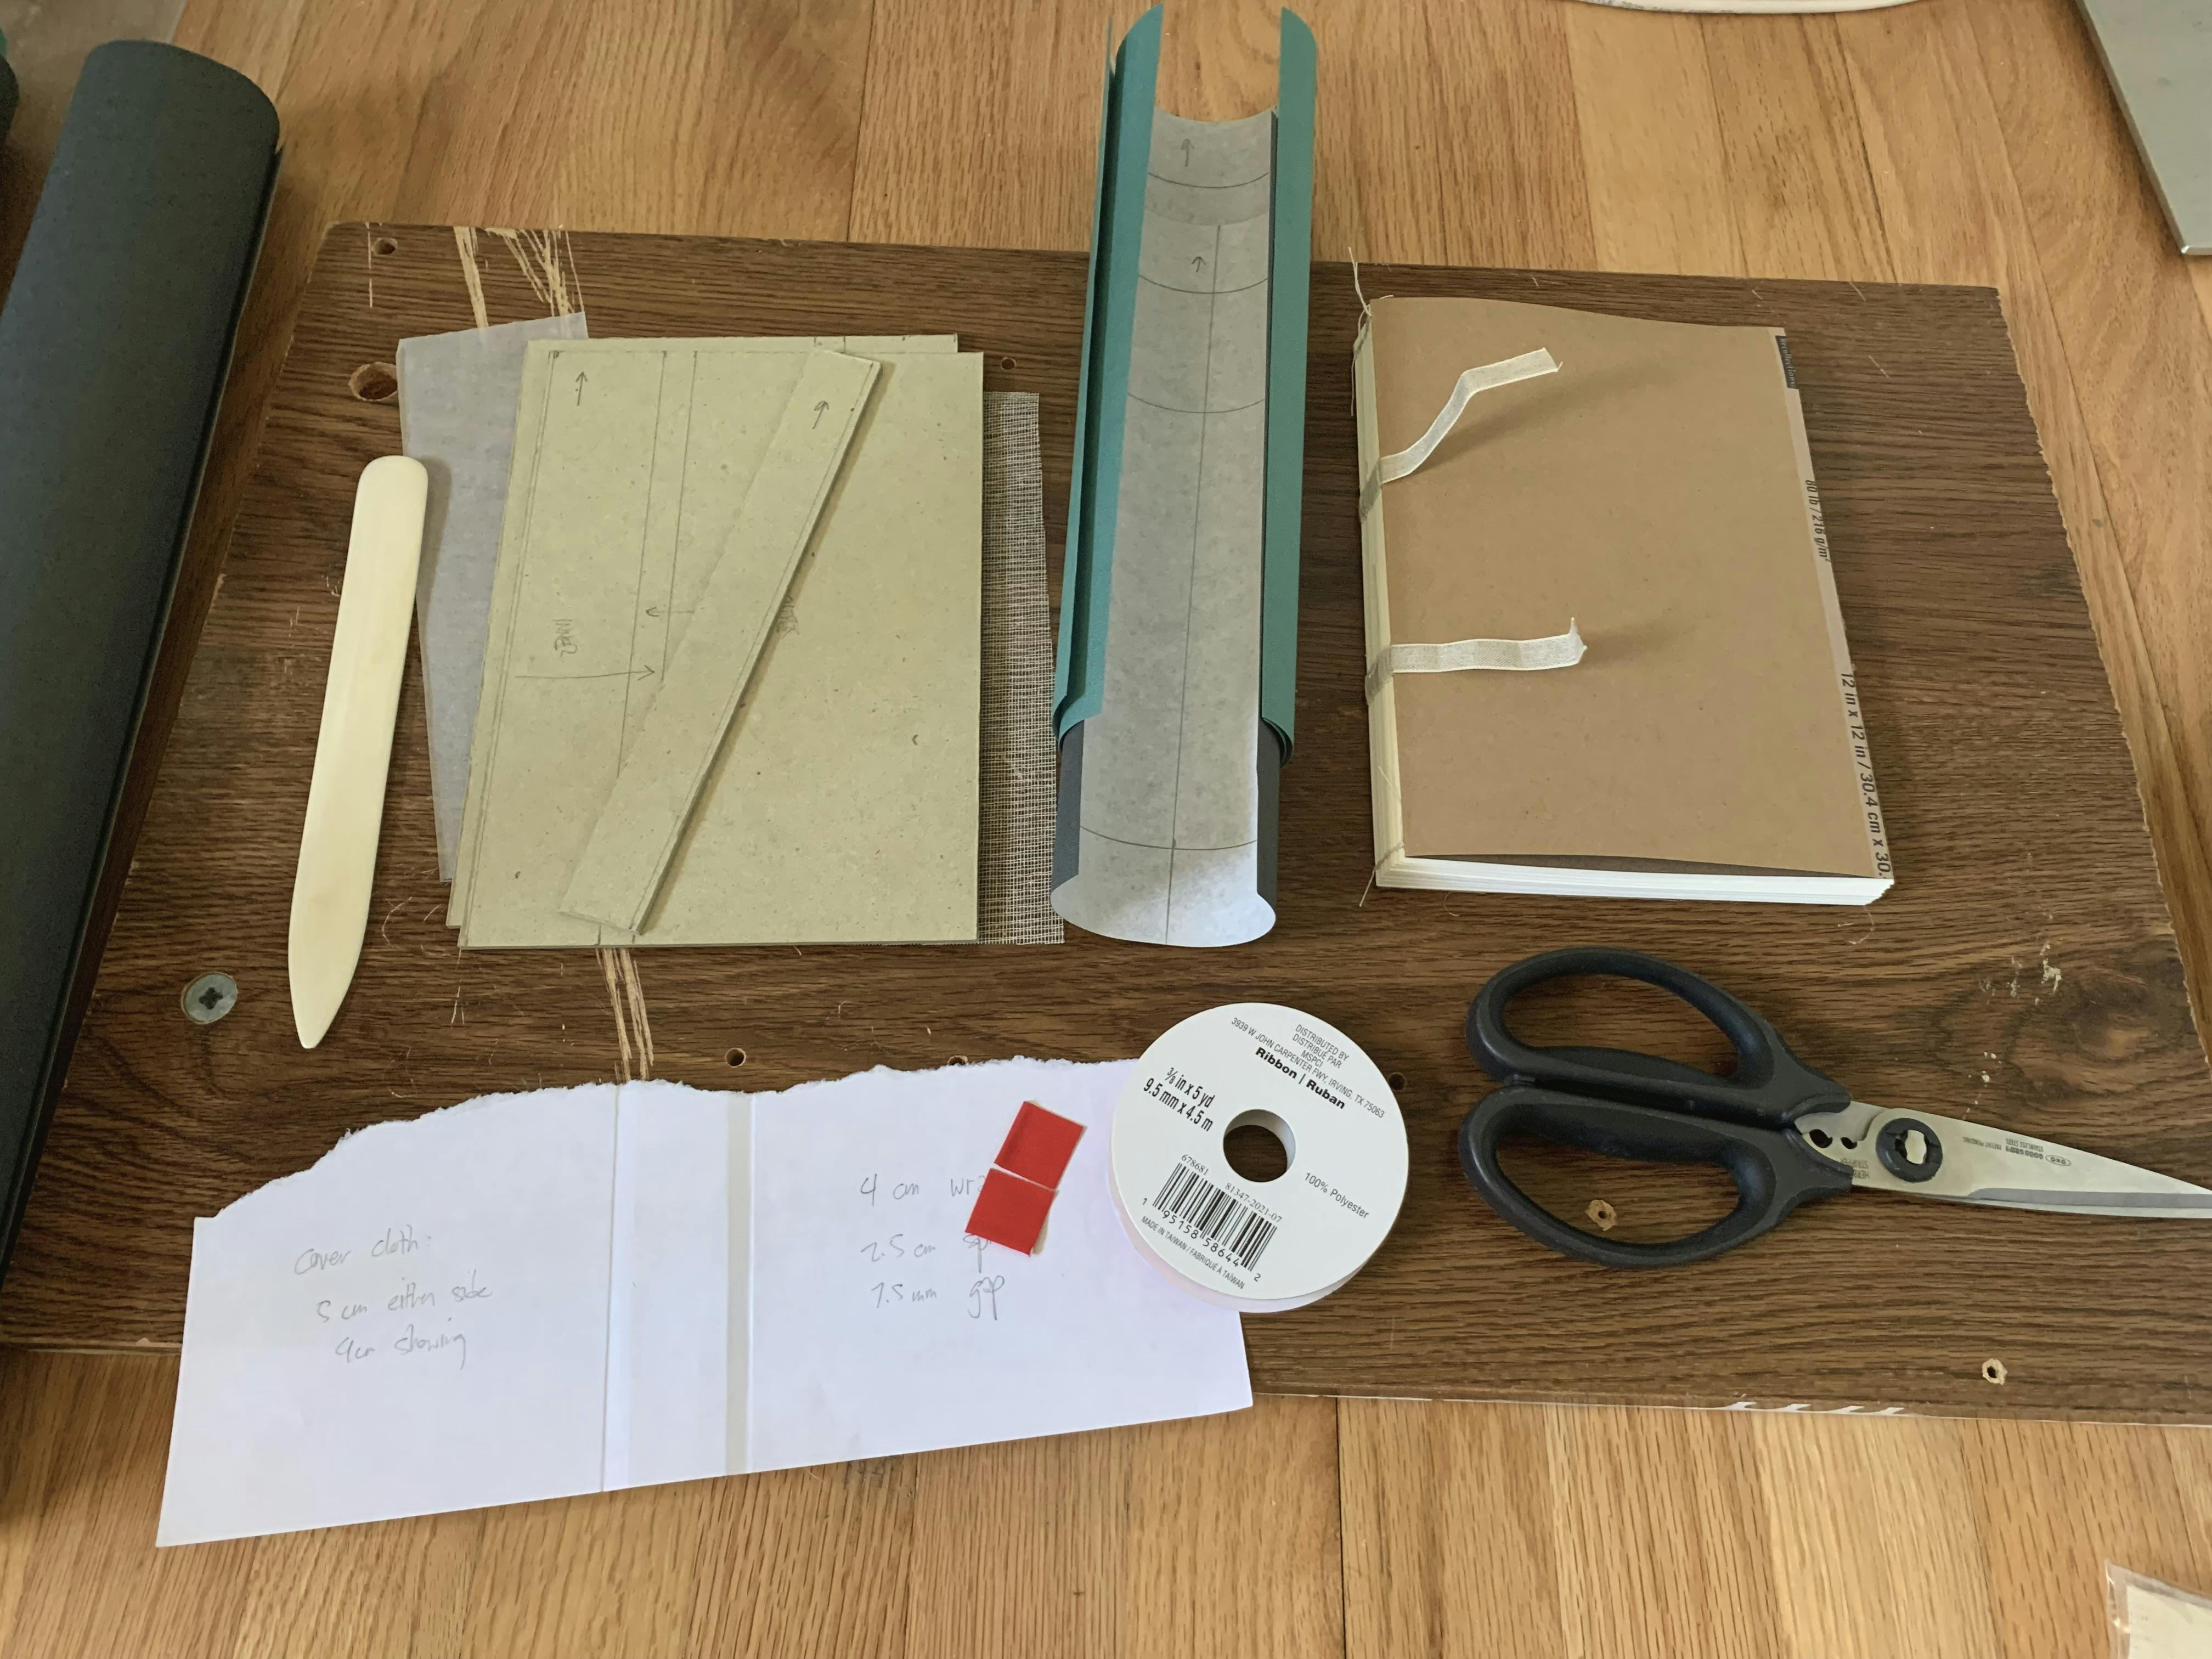 A photo of the parts of my notebook: cover boards, fabric, the sewn book block, scissors, ribbon, and a spine measuring guide rest on a wooden floor.